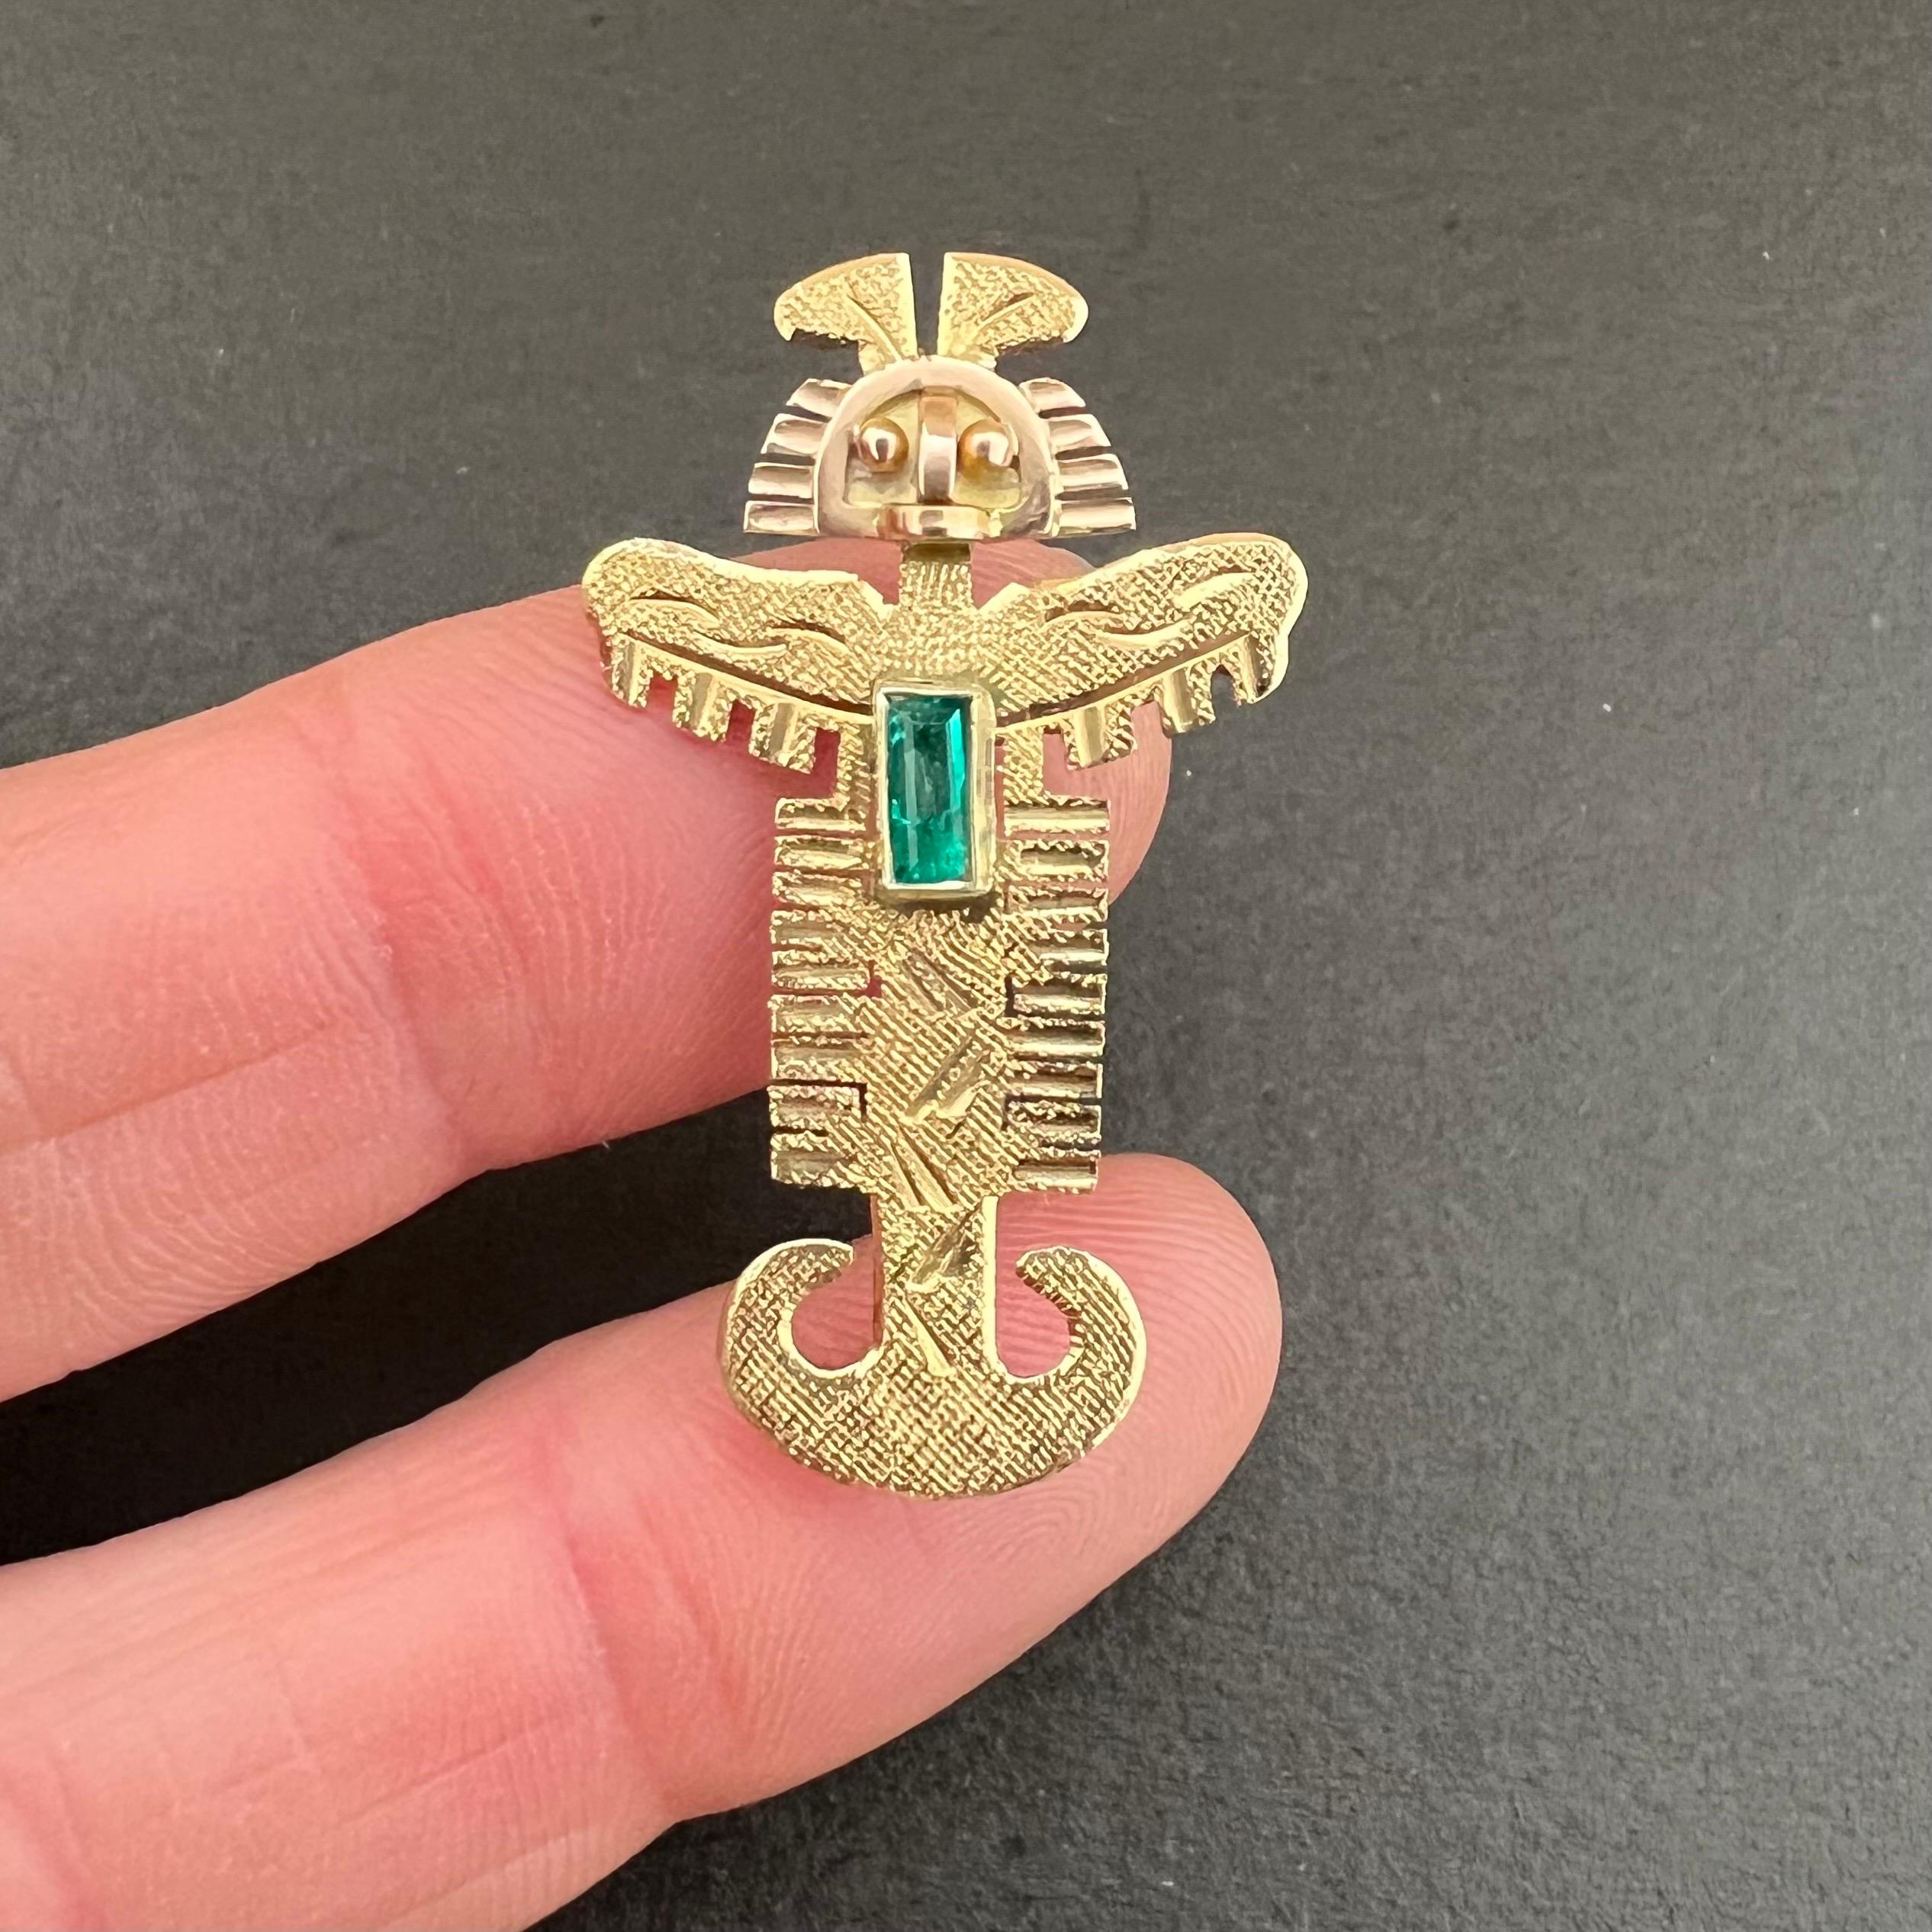 An 18 karat yellow gold mid-century 1960's pre-Columbian Tolima pendant set with an emerald. The symmetrical pendant has engraved details and a gold satin finish. The pendant can also be worn as a brooch. 

This pendant in the Tolima style, comes